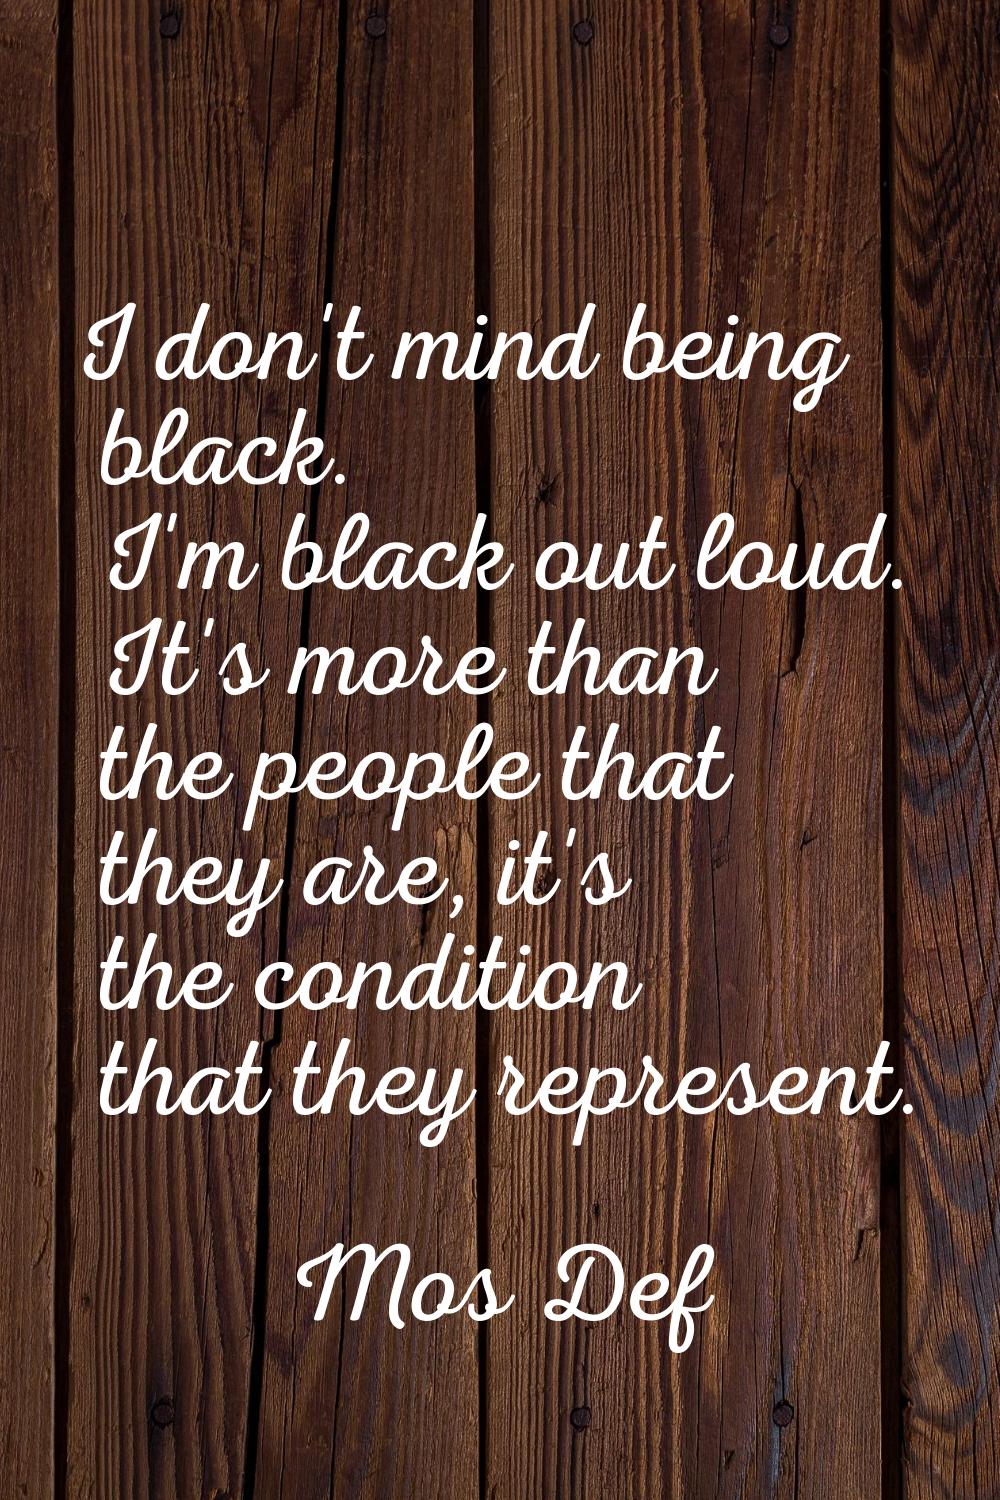 I don't mind being black. I'm black out loud. It's more than the people that they are, it's the con